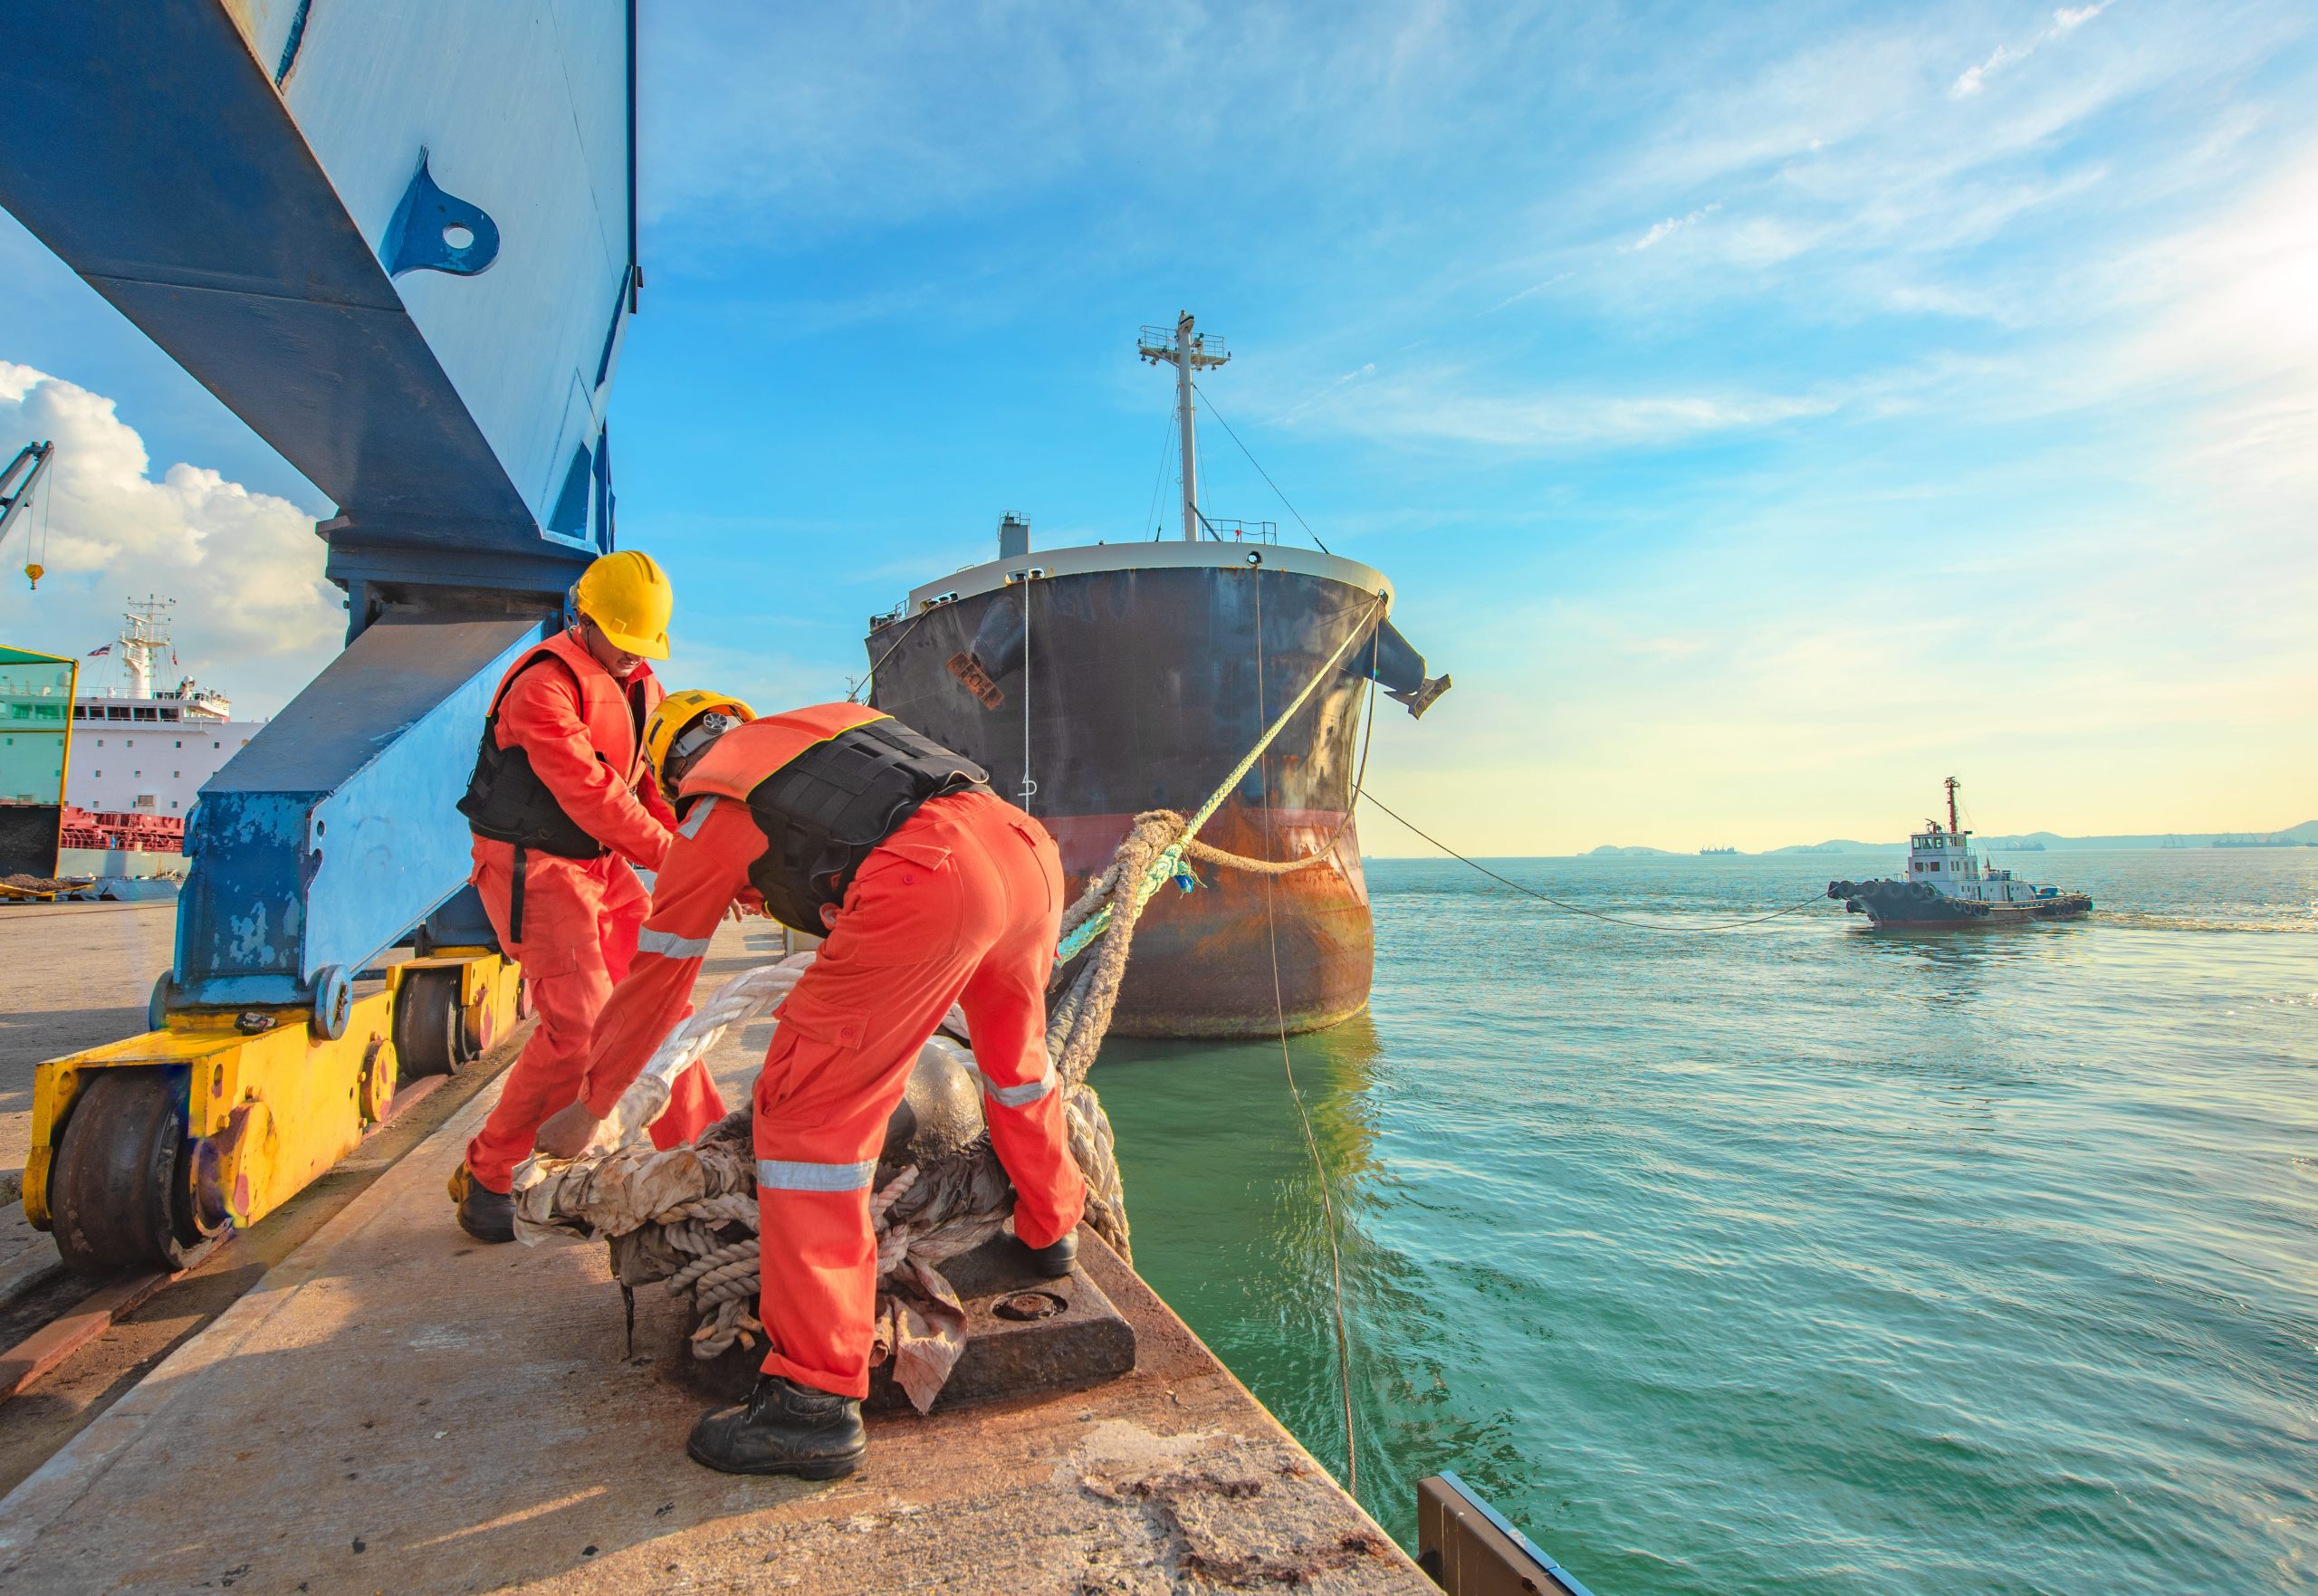 ShowEquip covers the Maritime sector / industry. Image of shore staff handling mooring lines for a large ship.